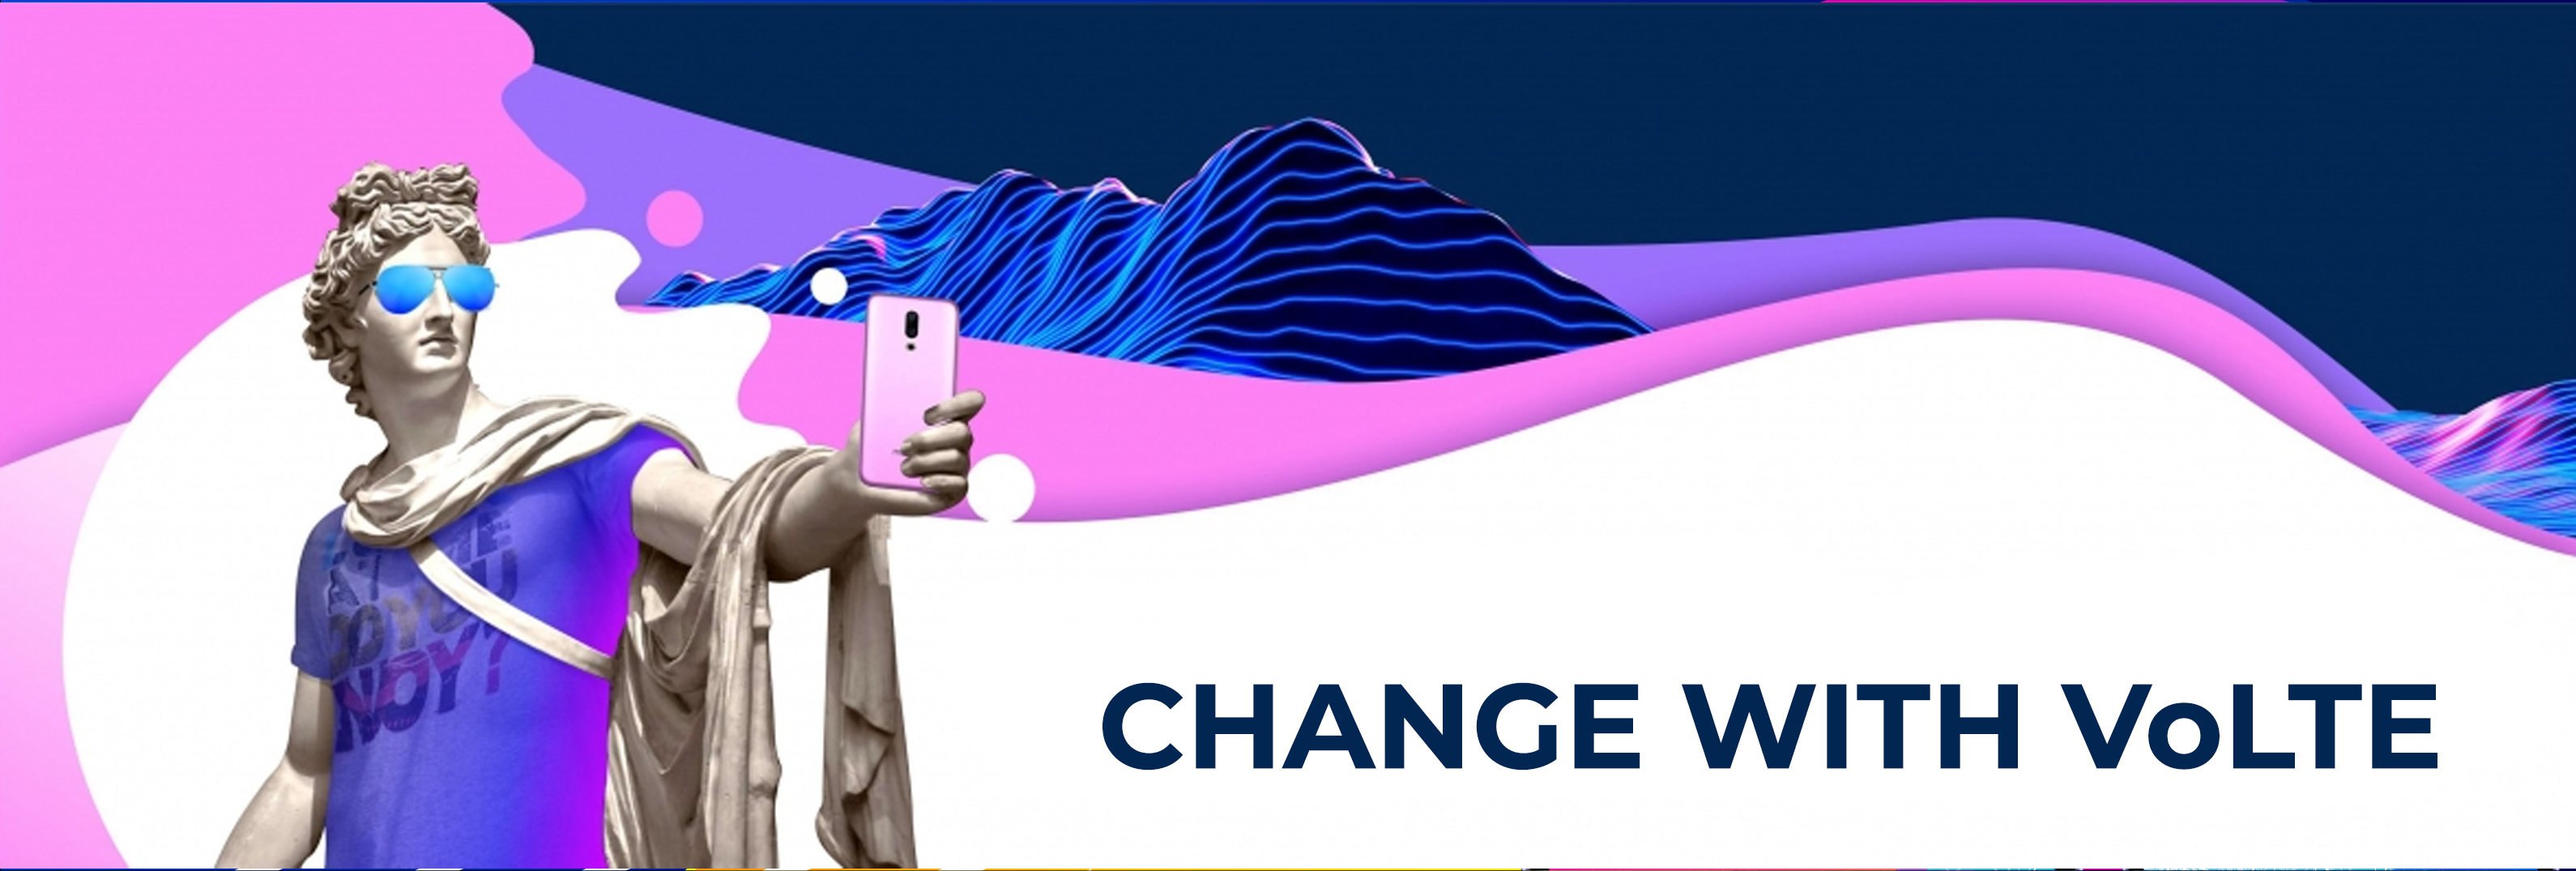 Change with VoLTE promotion!